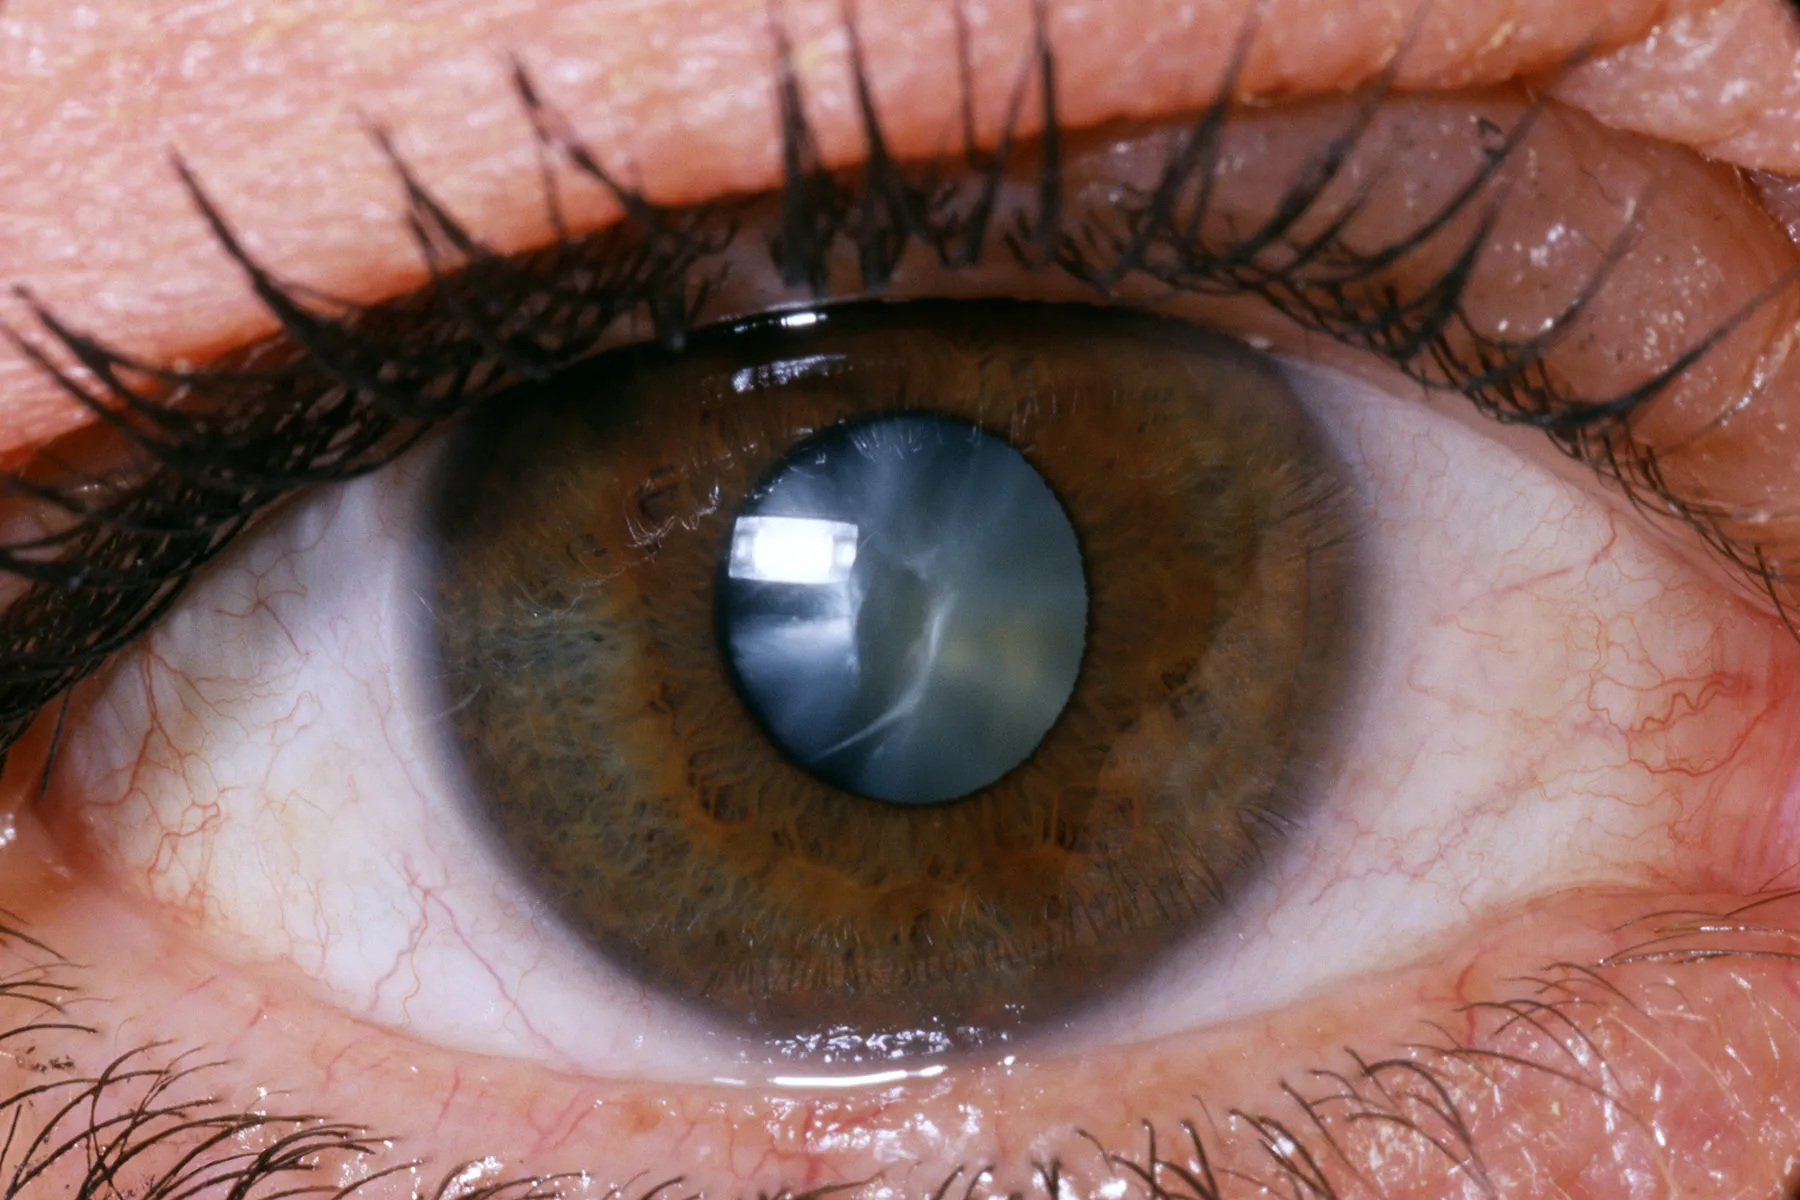 Cataract Surgery Might Lower Your Odds for Dementia